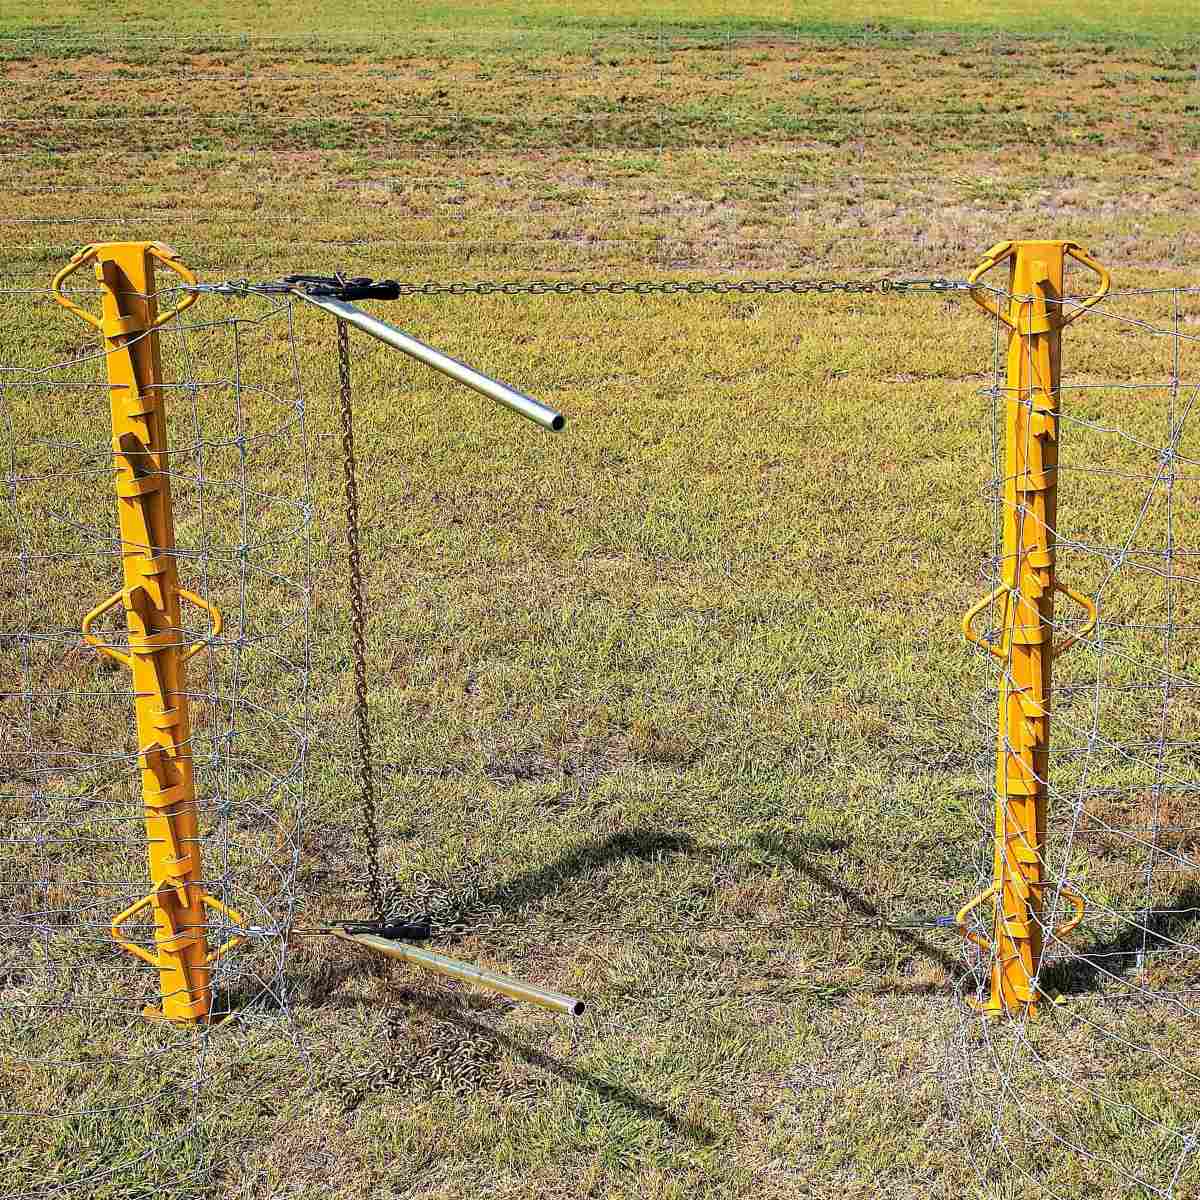 How To Use Fence Stretcher